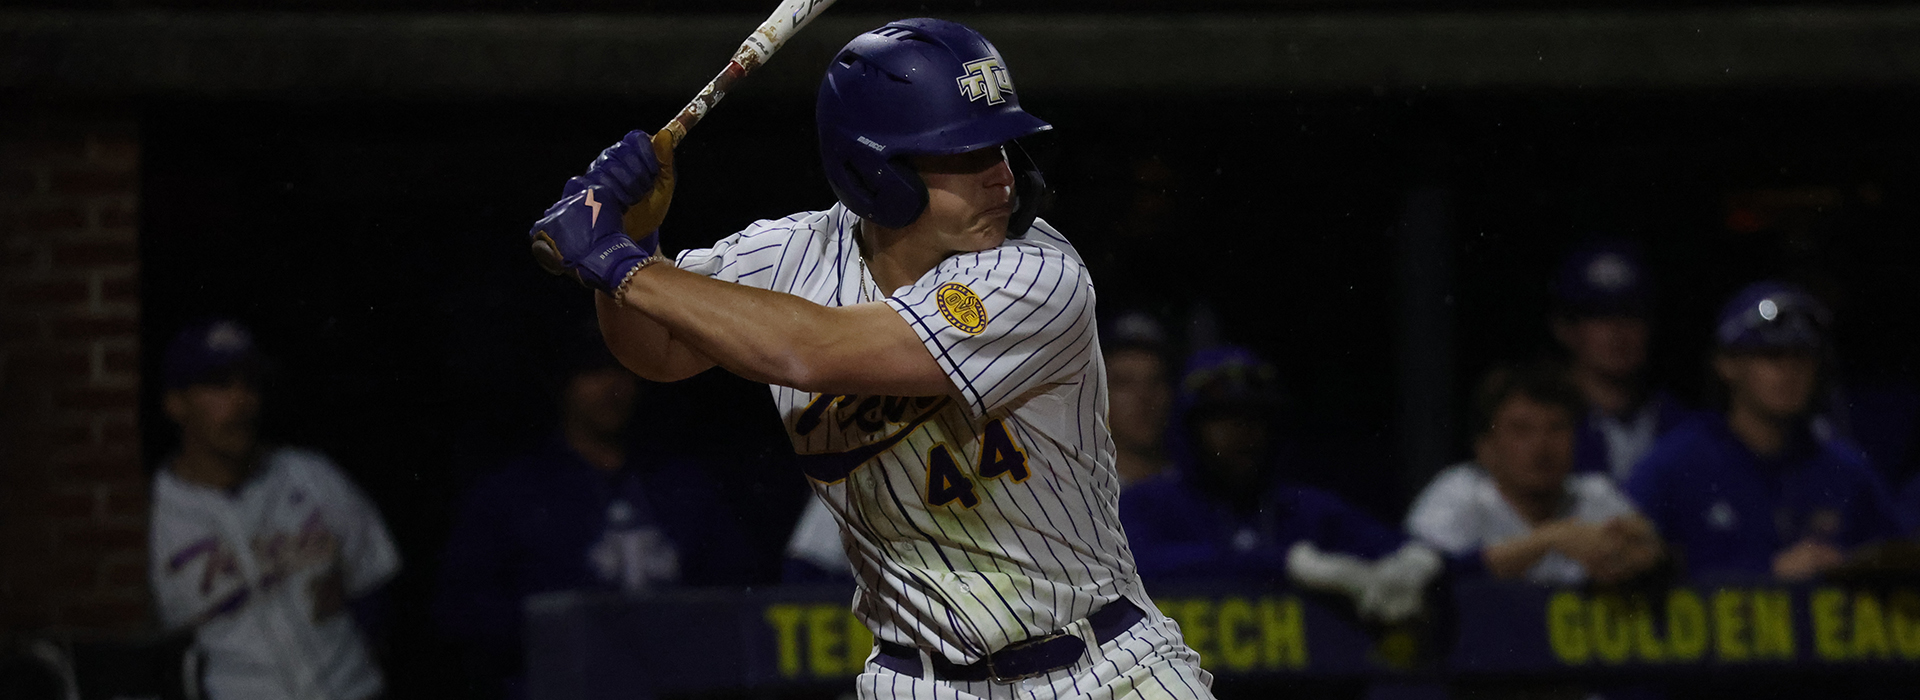 Tech falls in series opener at Davidson despite early offense